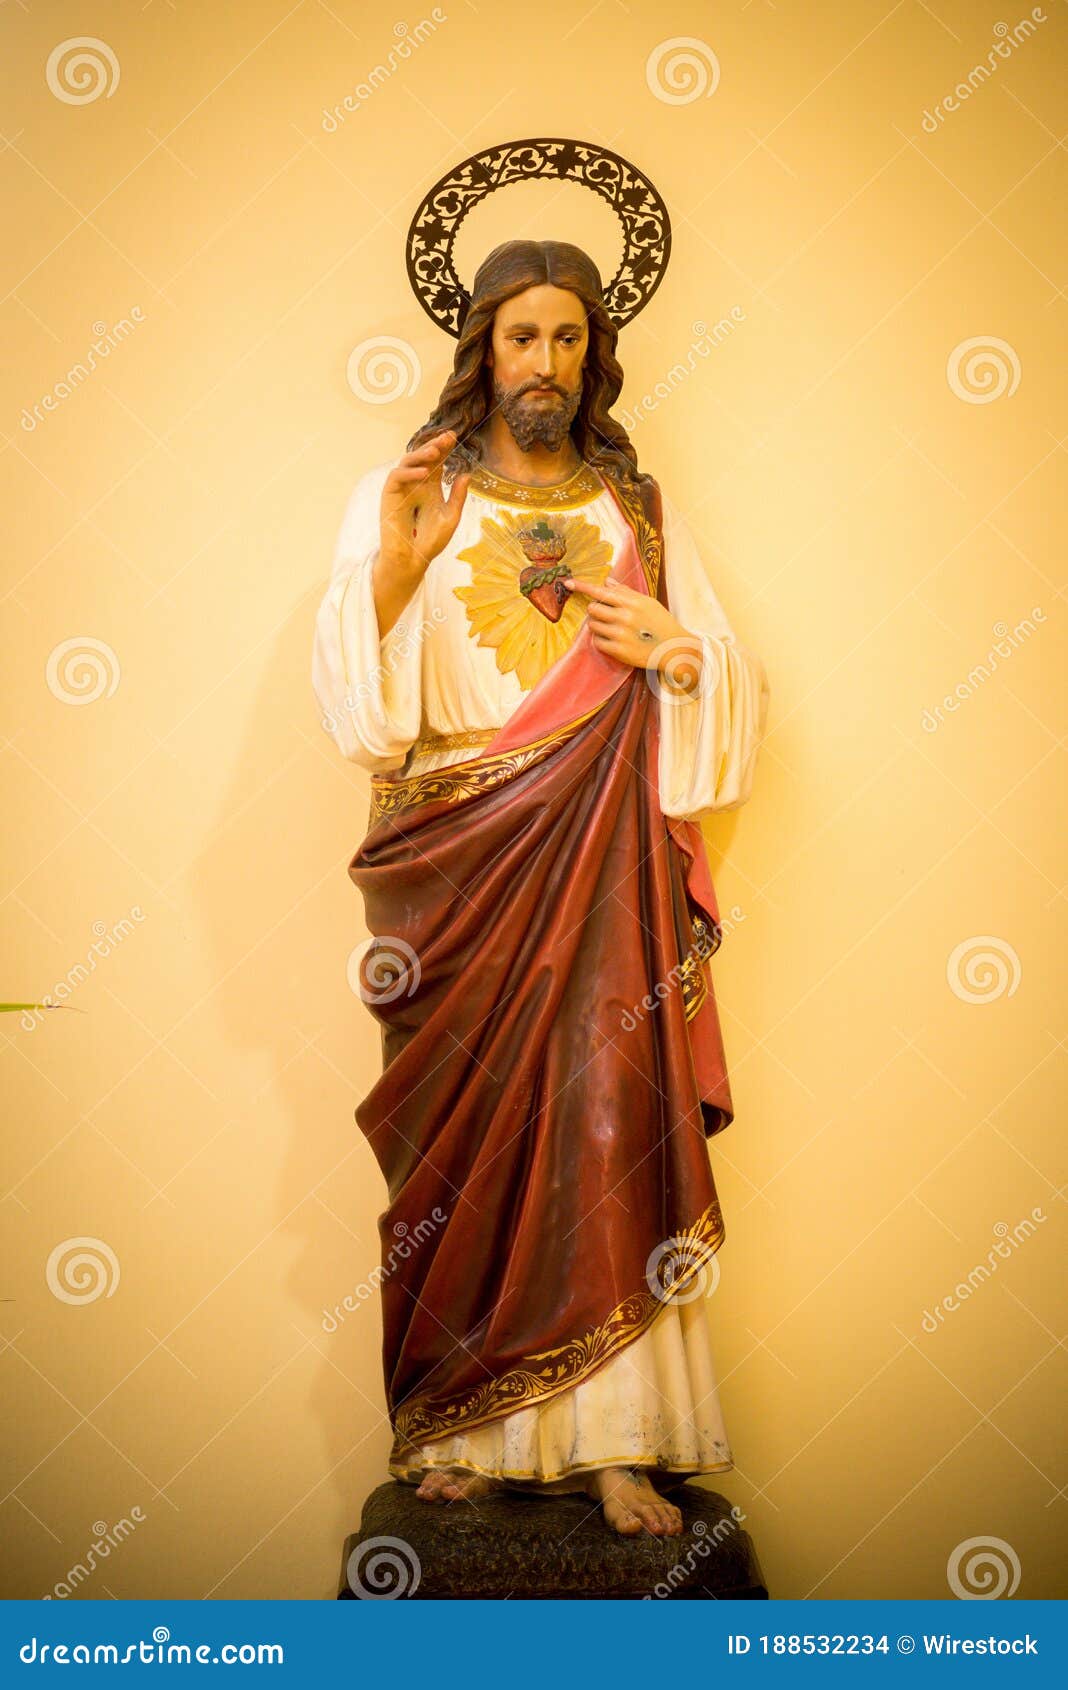 Vertical Shot of a Statue of Jesus Christ in a Red Robe on a Yellow ...